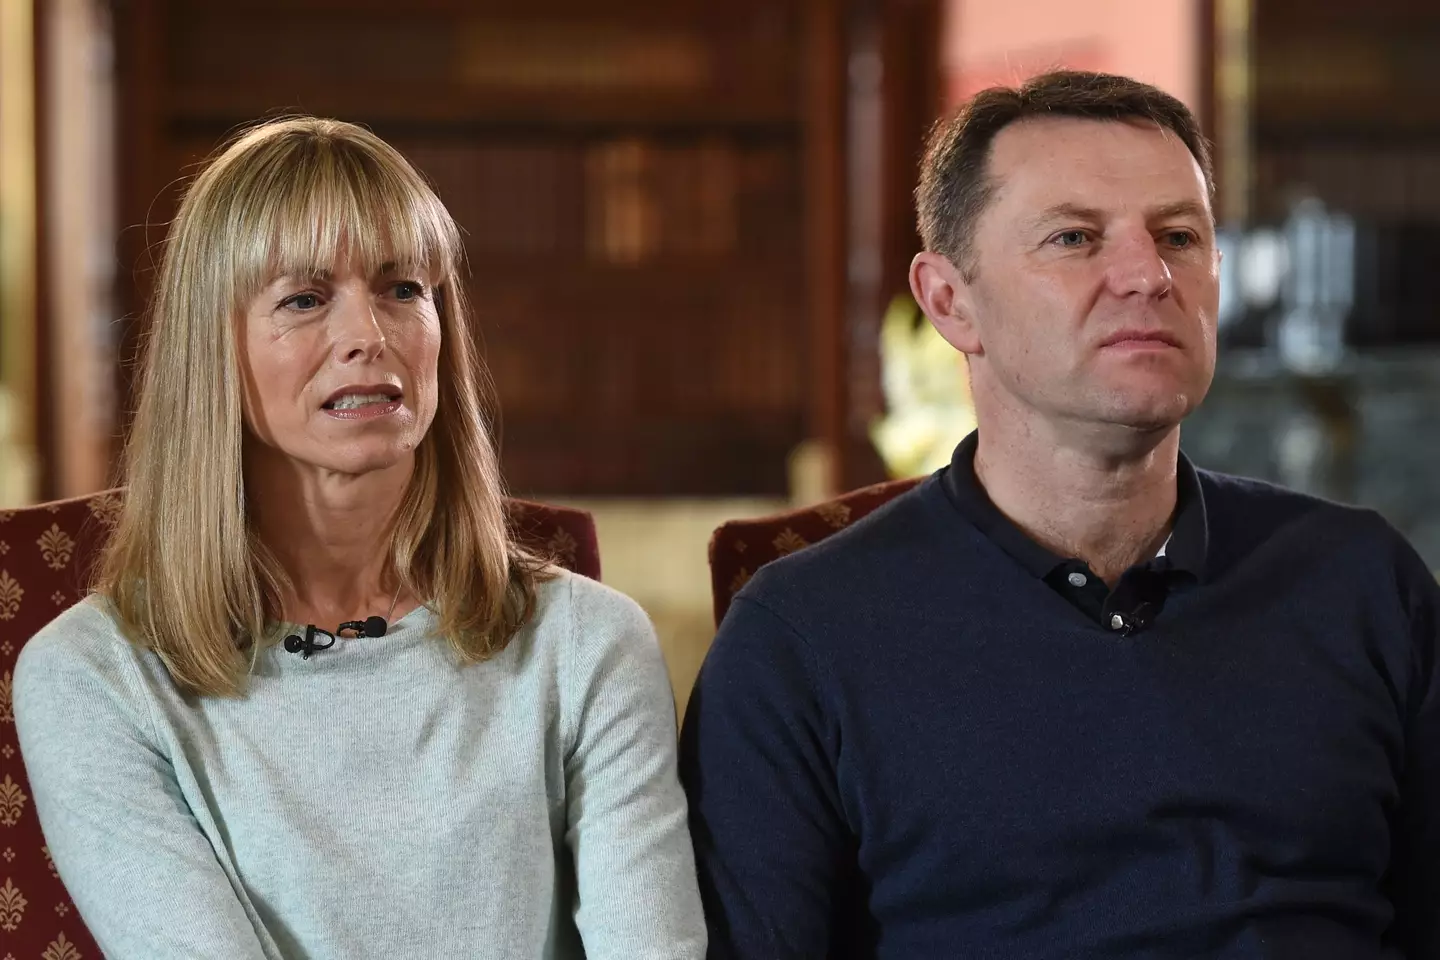 Kate McCann wrote a book on Madeleine's disappearance.